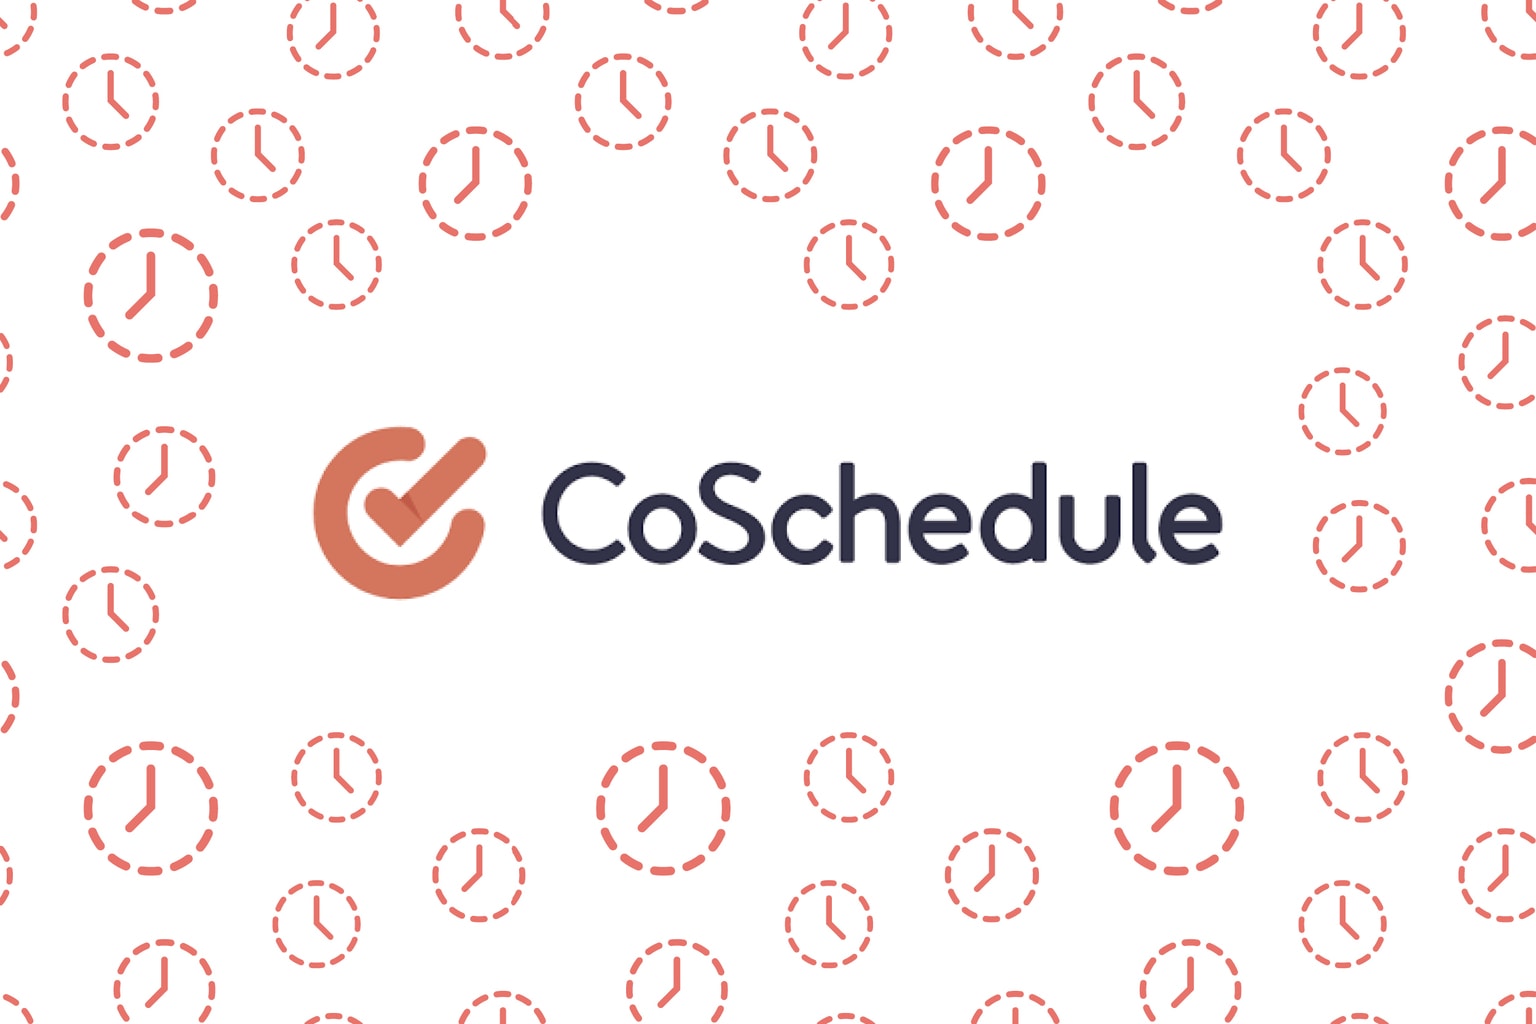 Content Marketing Tech Review: CoSchedule